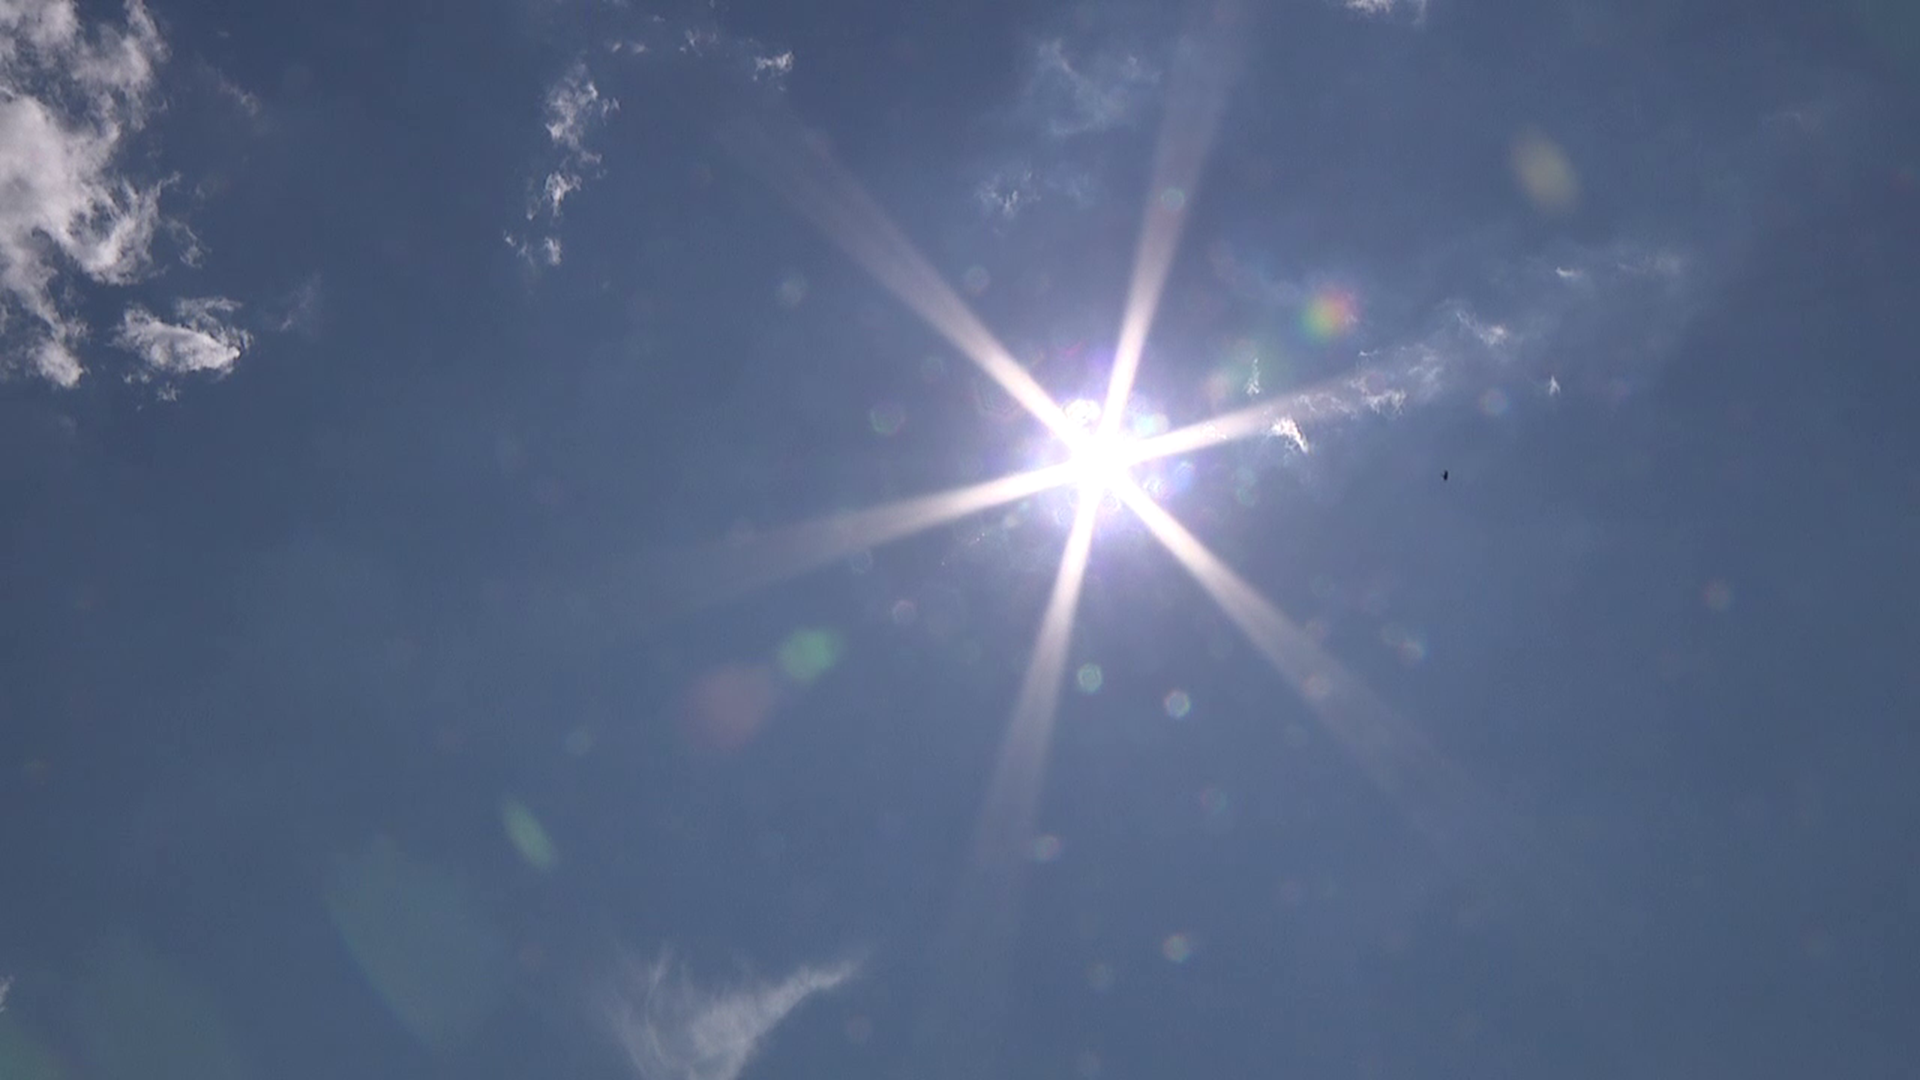 On a day like this, it can be challenging to find ways to keep cool. We spoke with folks in Union County about how they are managing to beat this extreme heat.